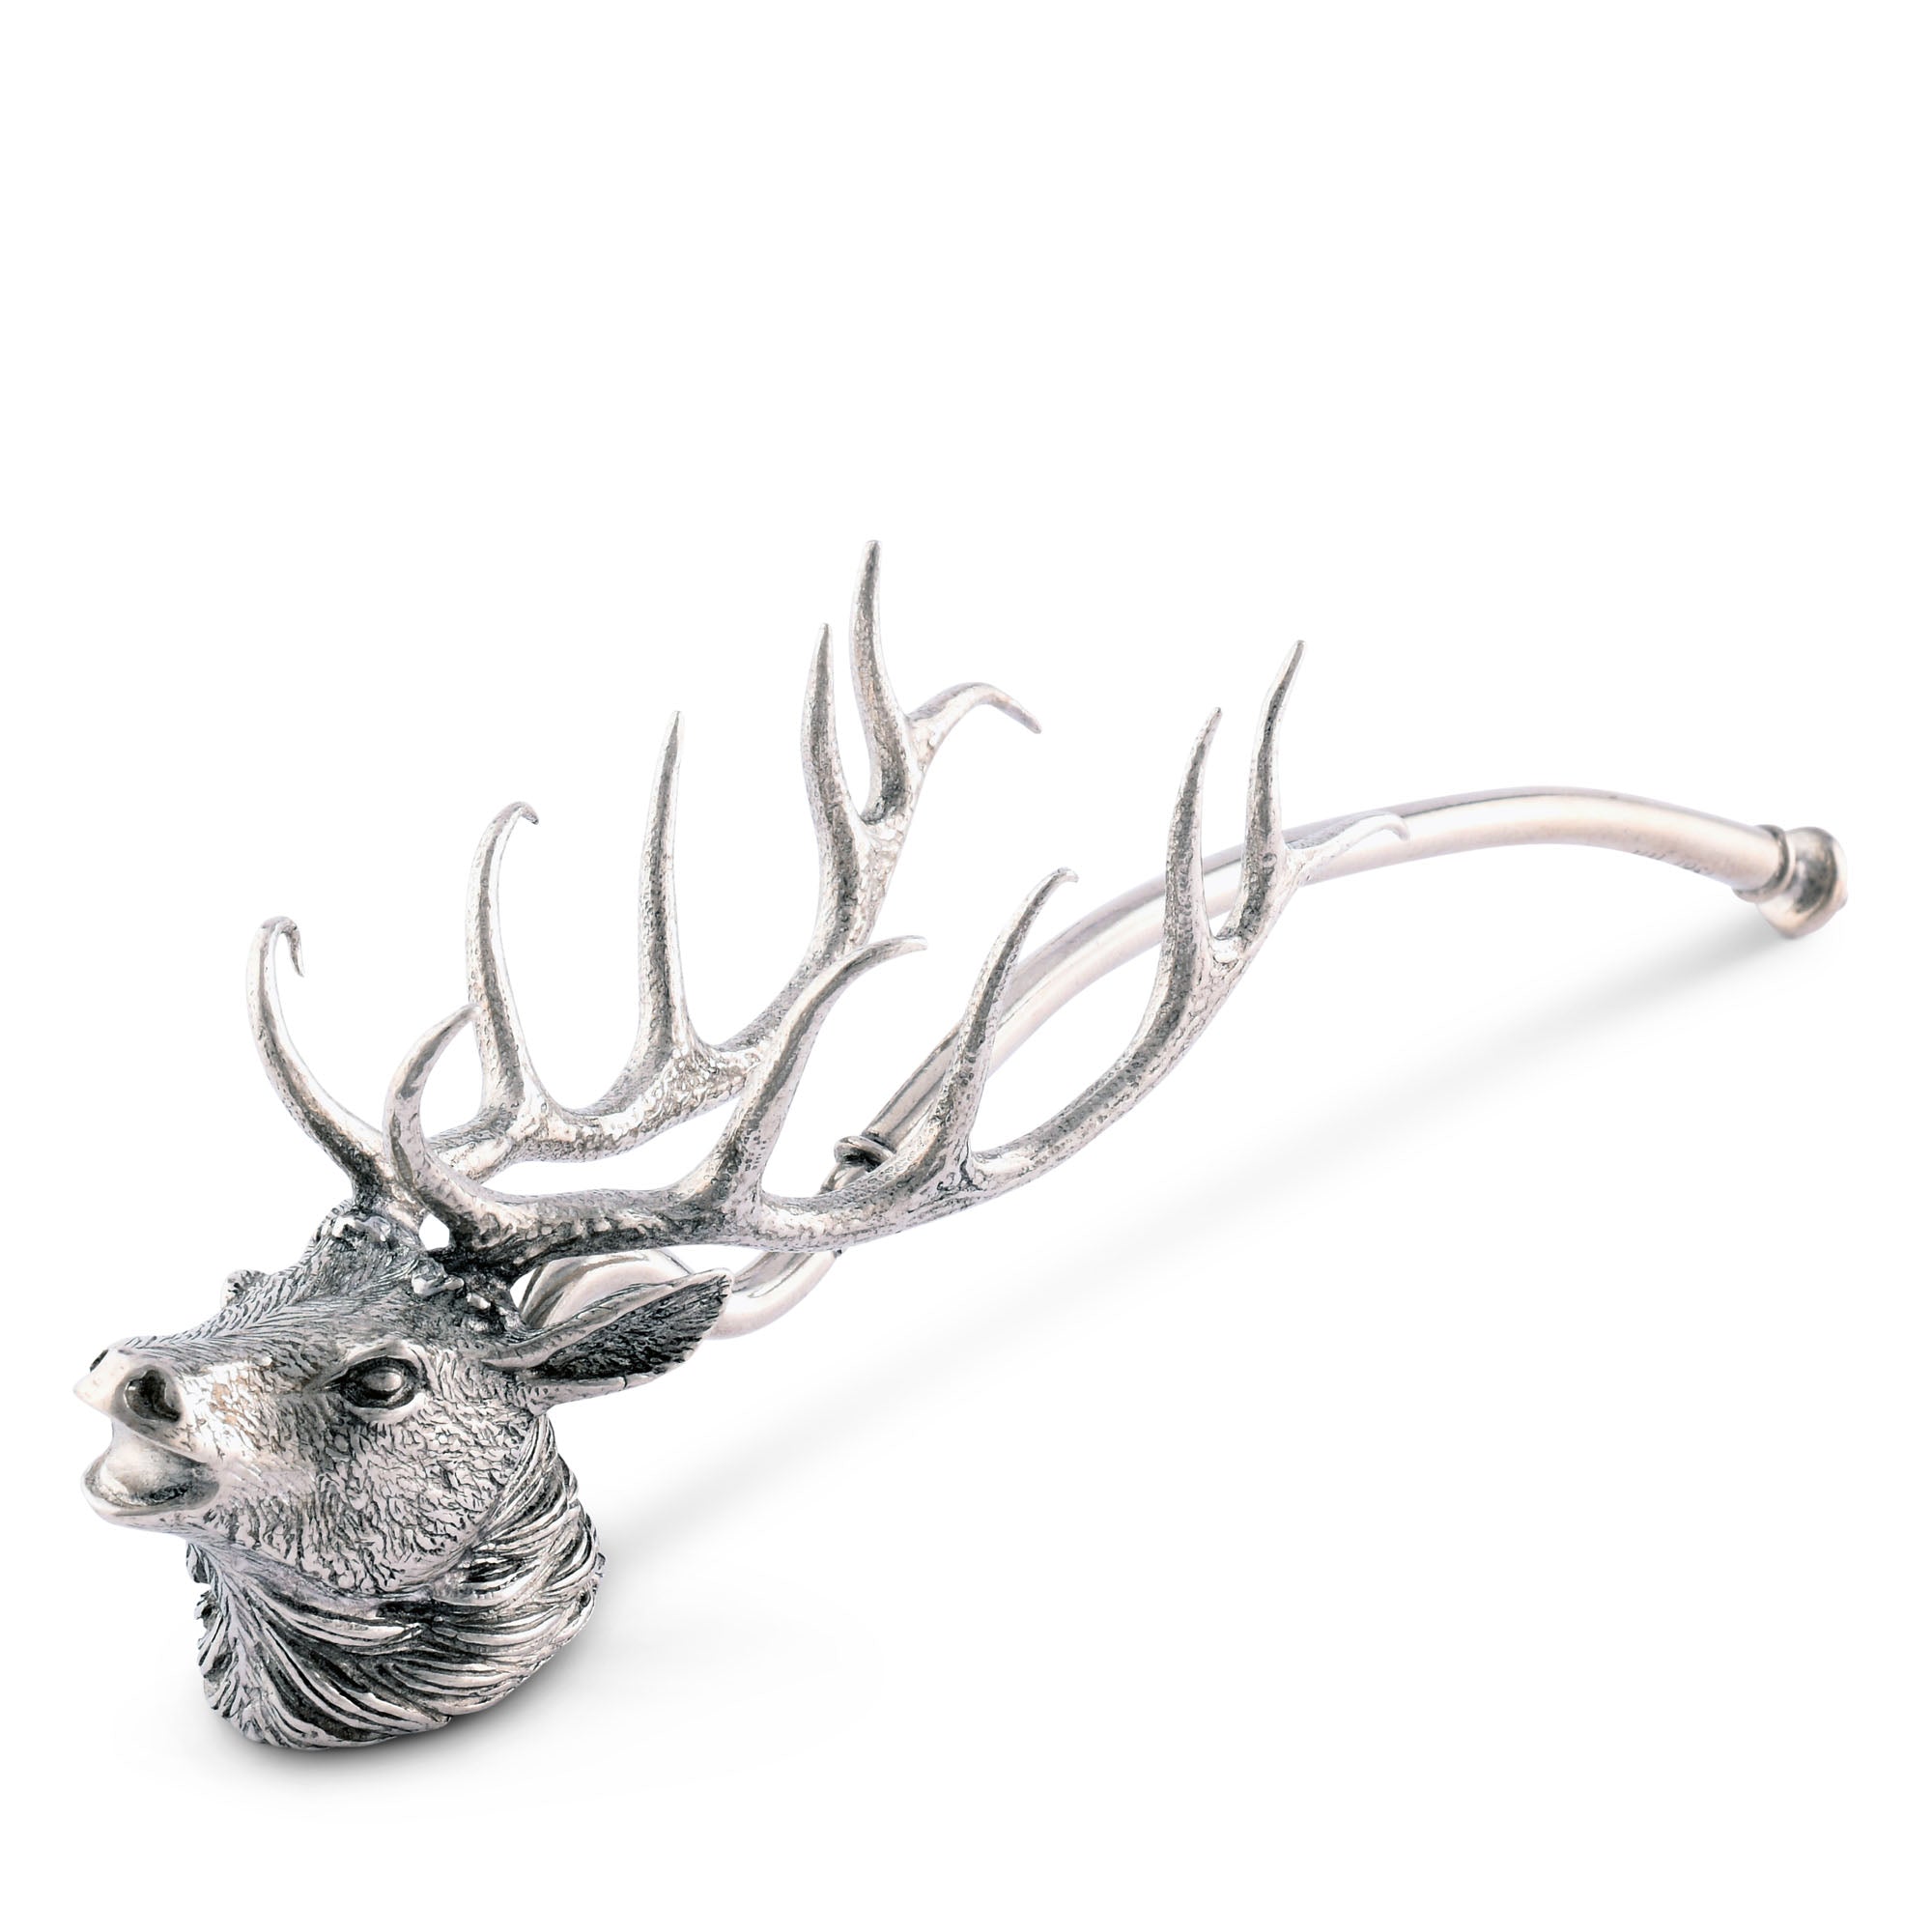 Vagabond House Pewter Elk Candle Snuffer Product Image